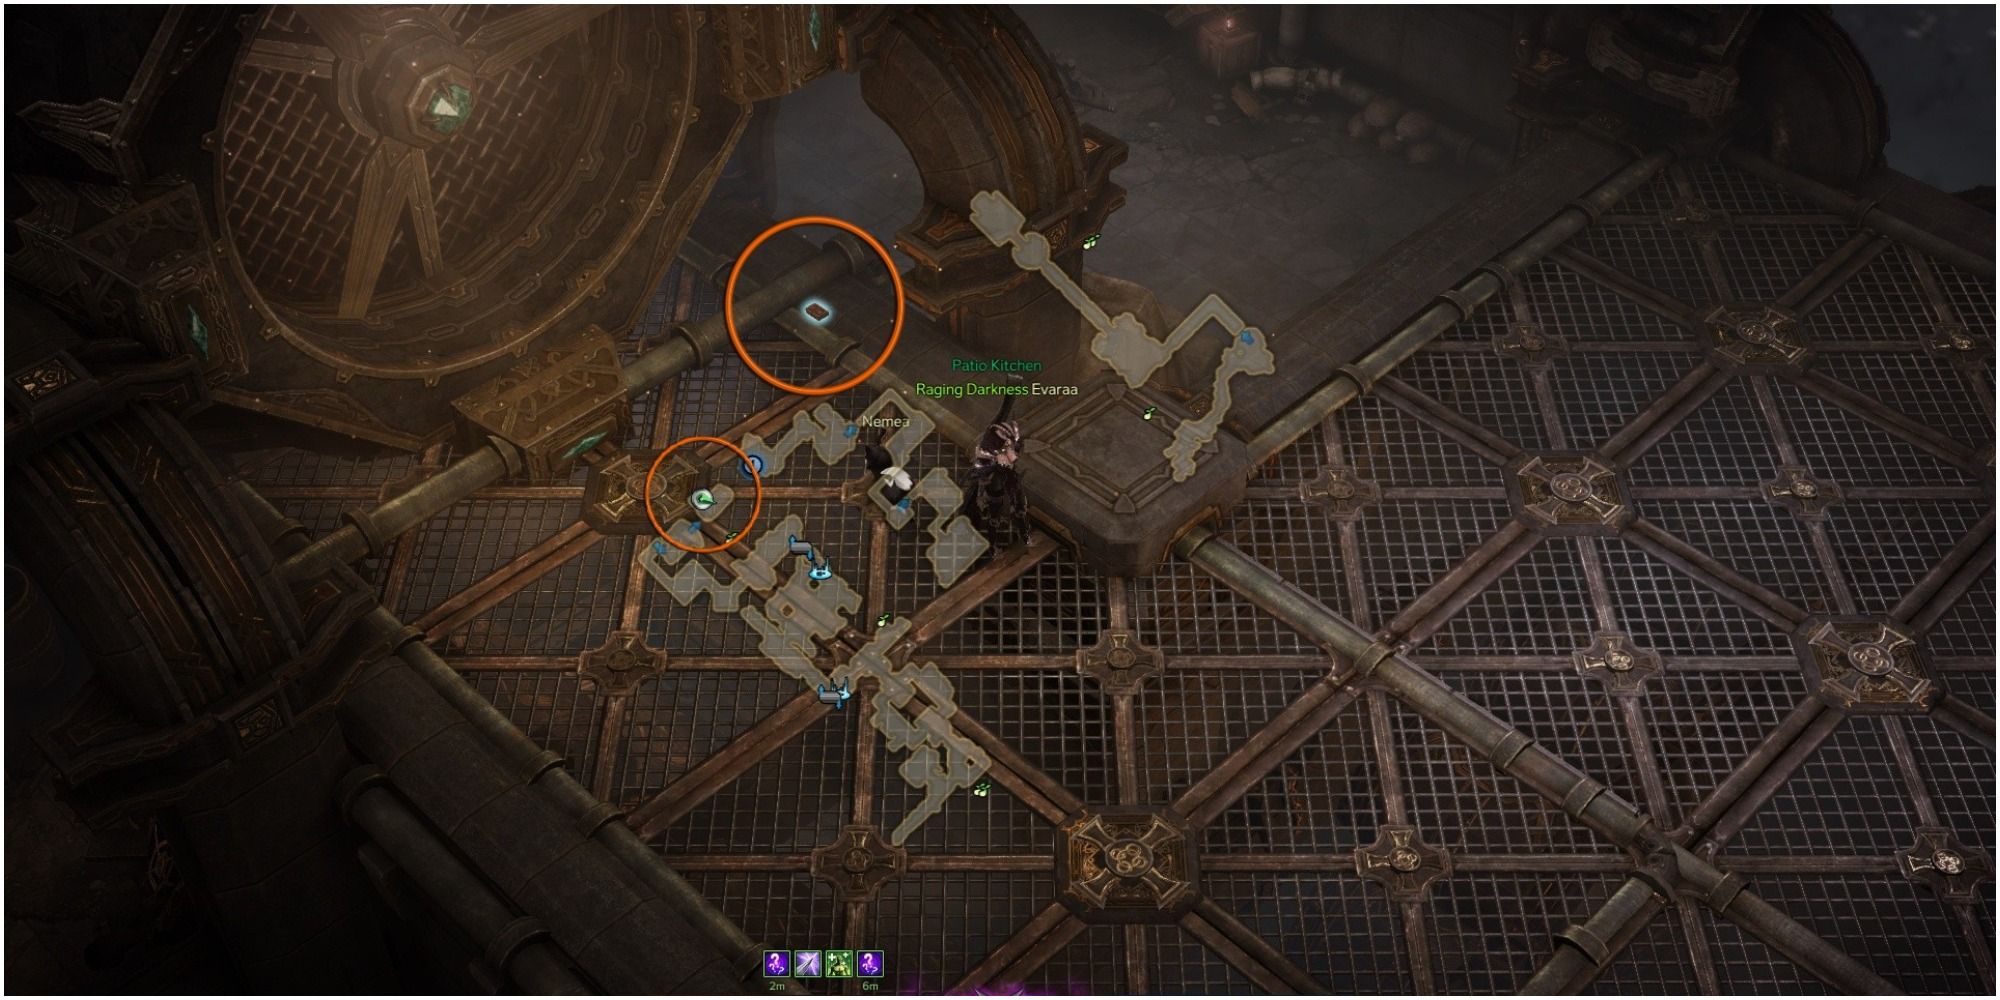 Lost Ark Yorn's Hidden Story 4-2 location with mini-map open, orange circle around object and player icon